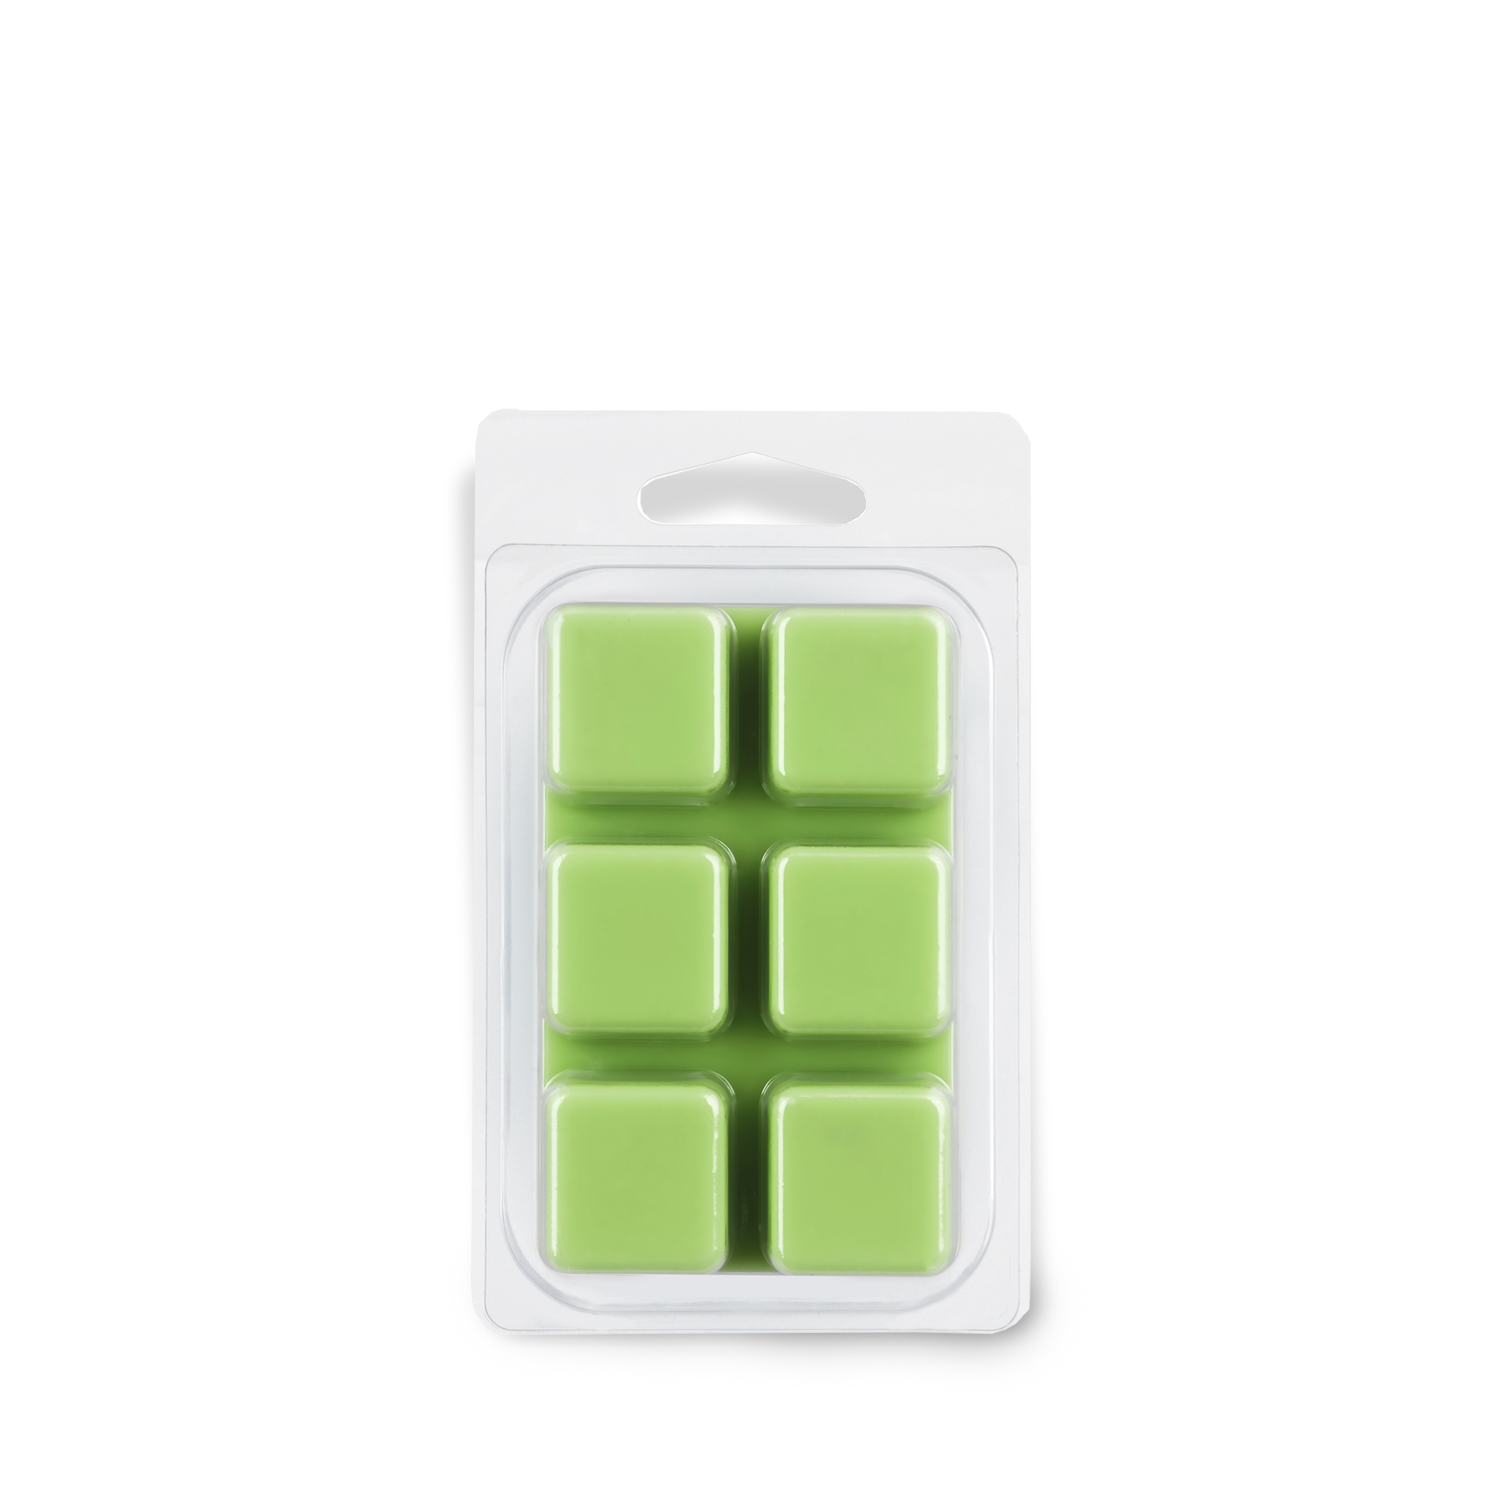 A pack of Freeisa & Fern scented wax melts by Tuscany Candle® SEASONAL on a white background.